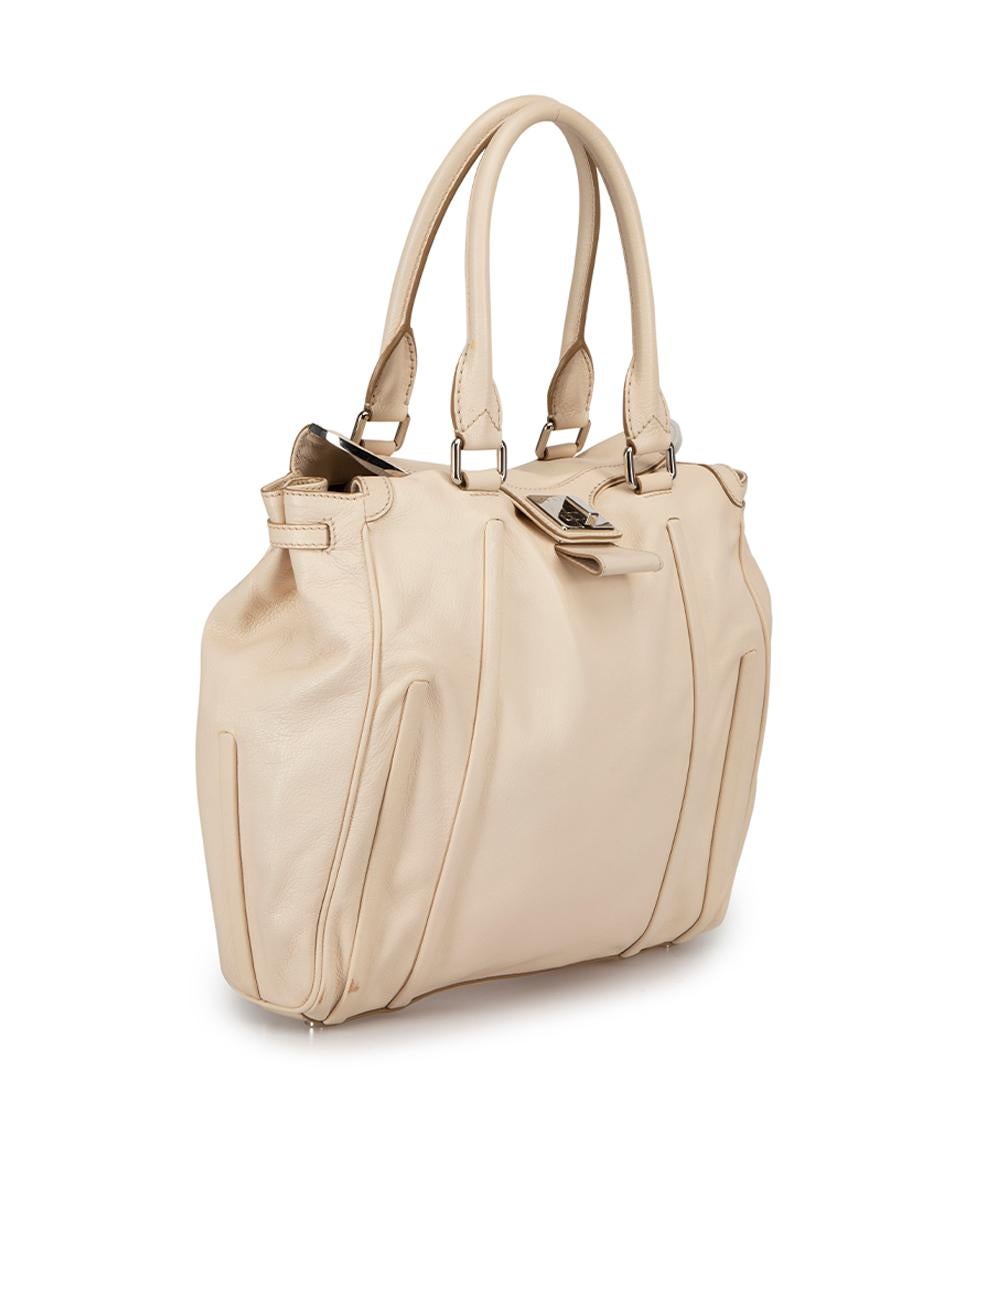 CONDITION is Very good. Minimal wear to bag is evident. Minimal wear to the front and base with scuffs on this used Céline designer resale item. This bag comes in original dust bag.



Details


Cream

Leather

Large tote bag

2x Rolled top